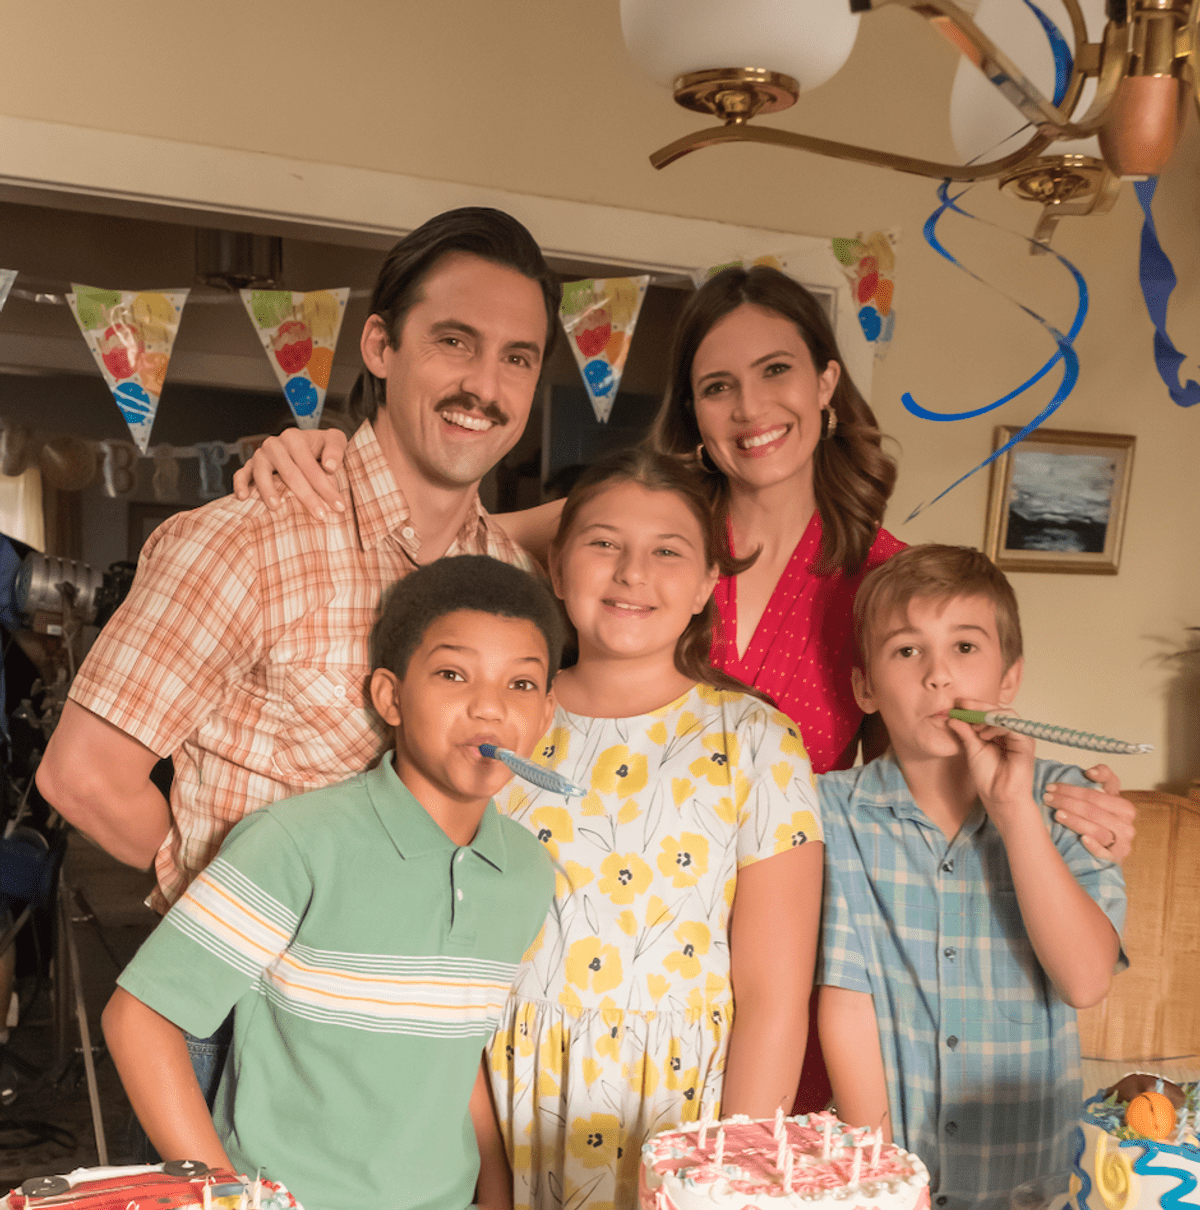 ‘This Is Us’ Was Almost Called ‘Happy Birthday’ but Milo Ventimiglia Refused